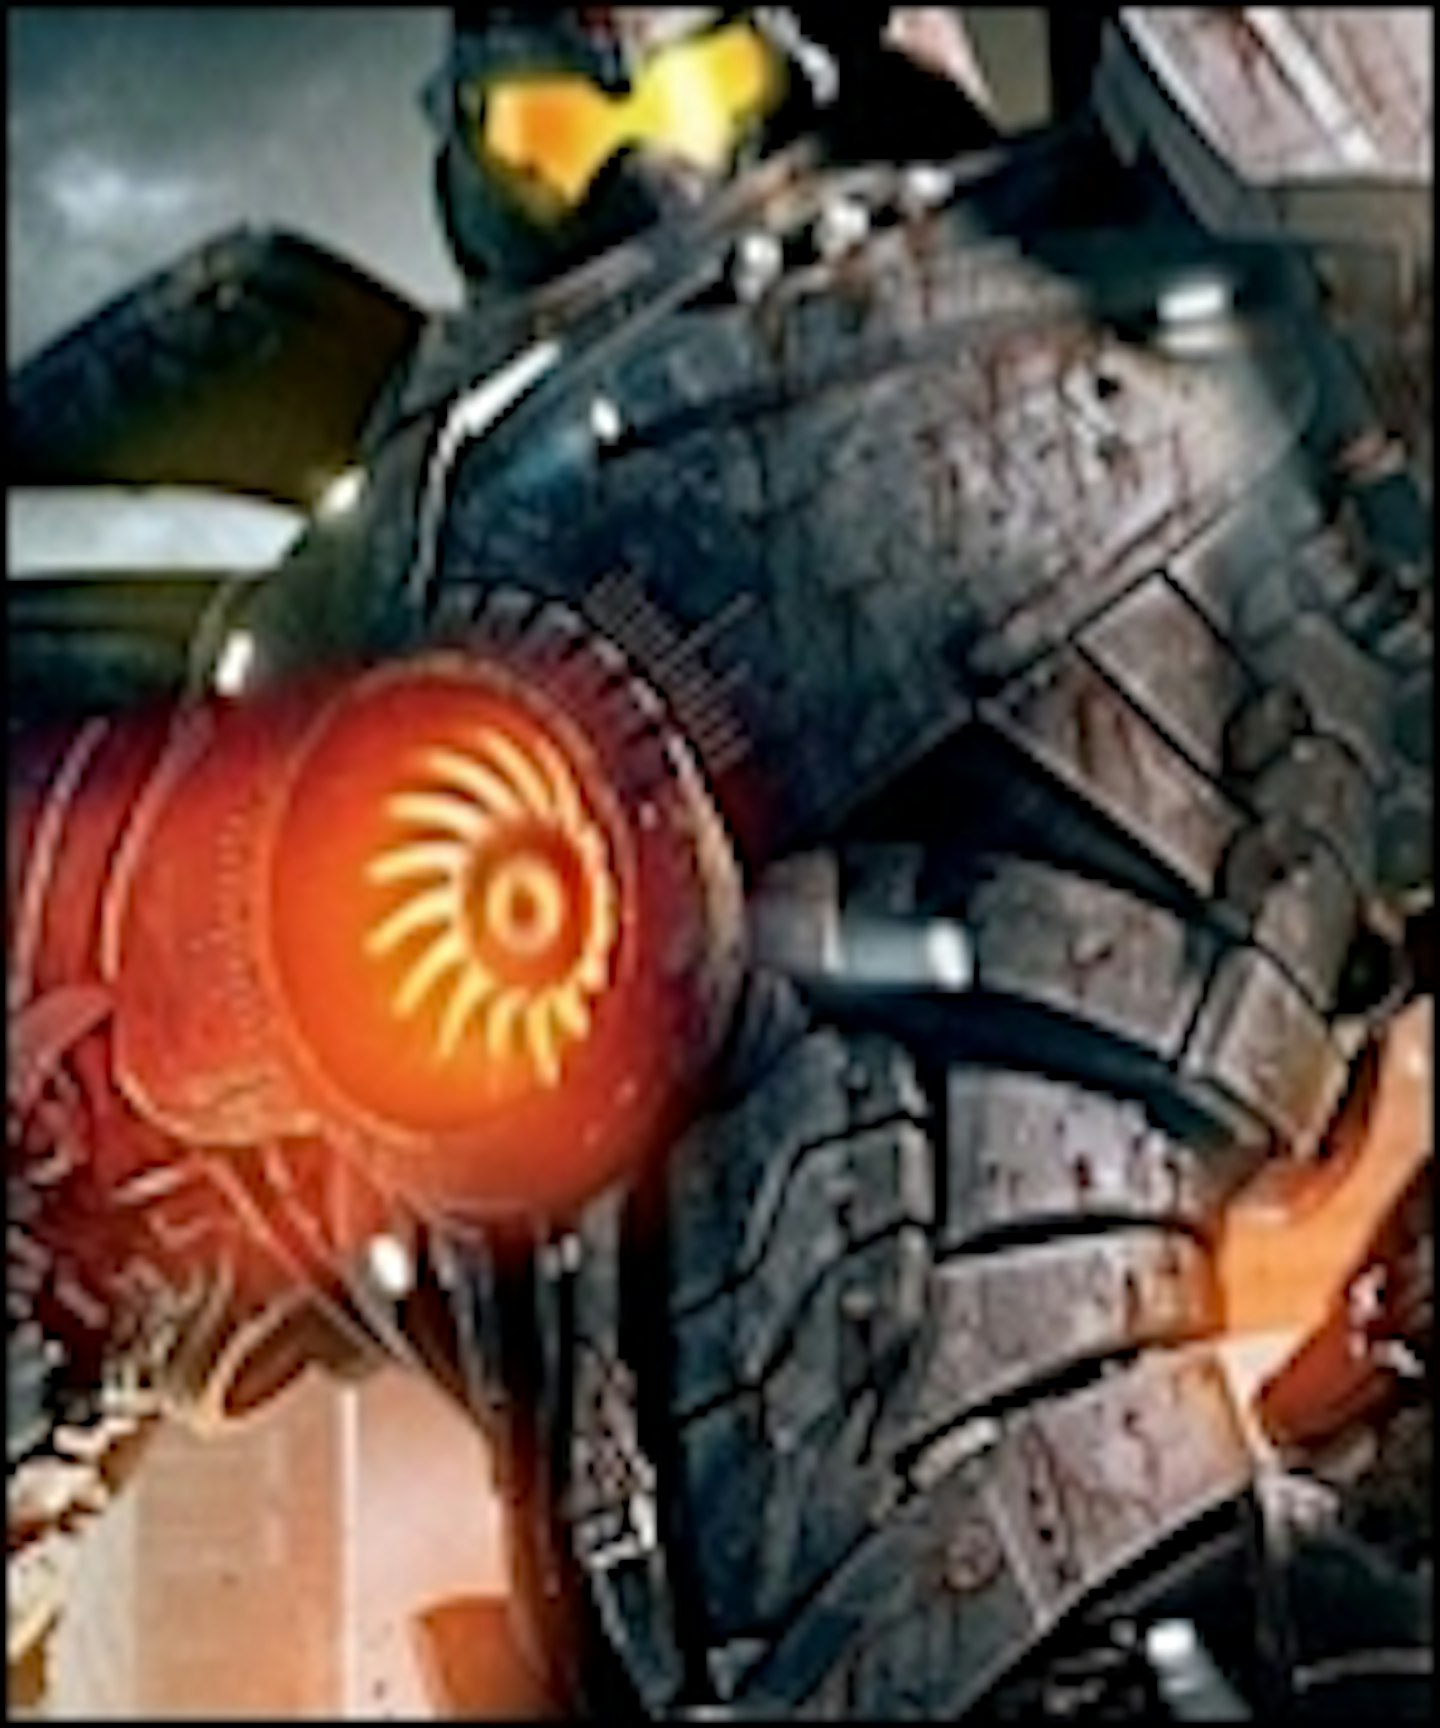 New Pacific Rim Poster Marches Online